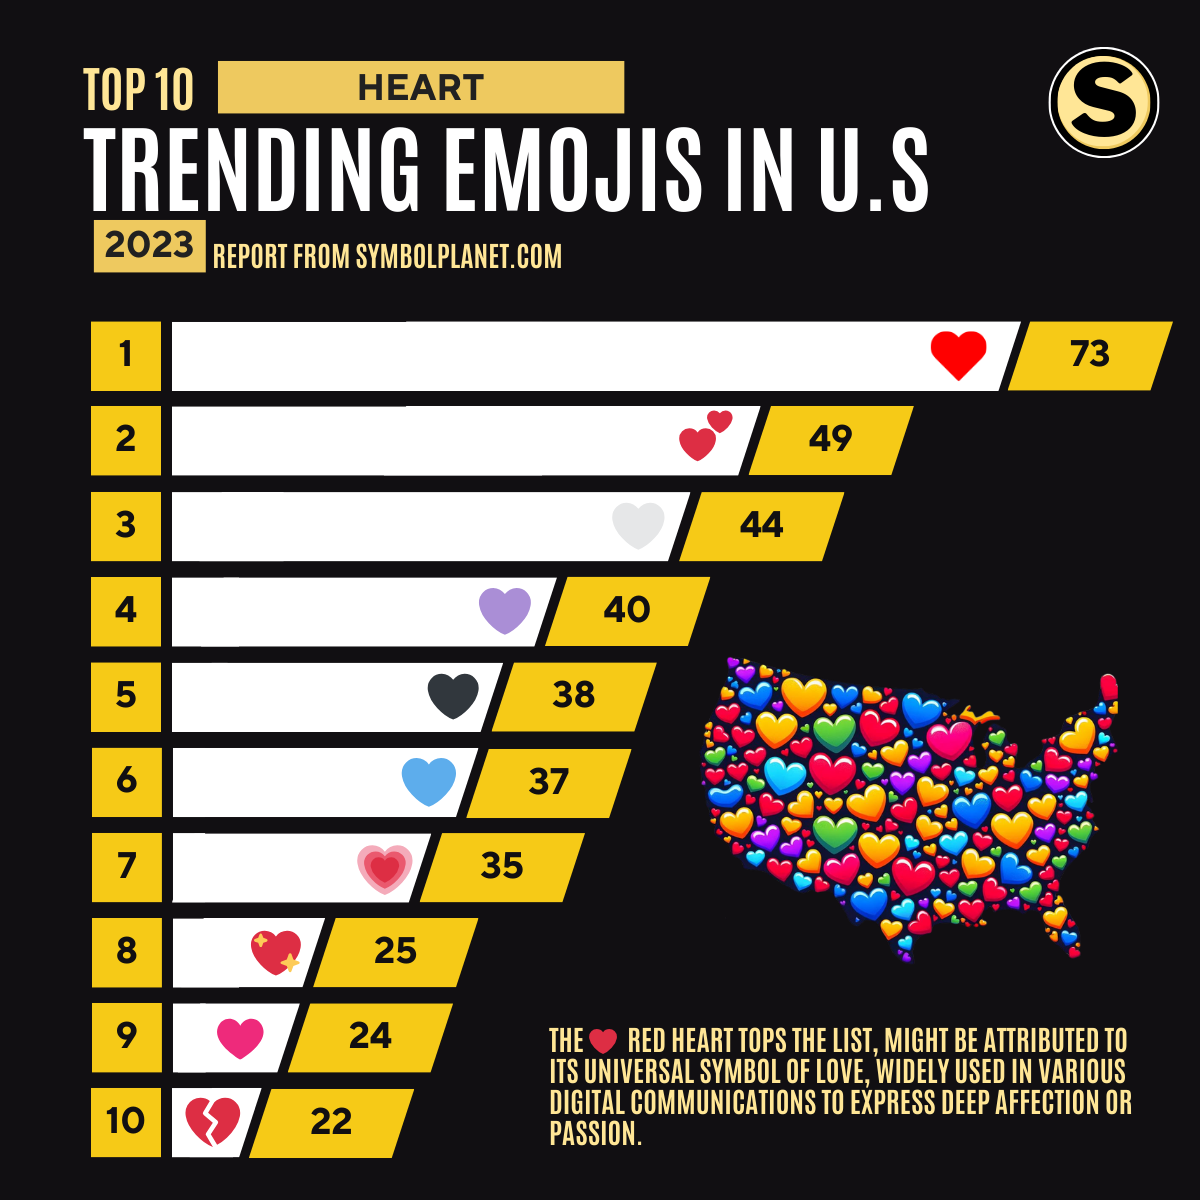 Top 10 Trending Heart Emojis of 2023 in the United States